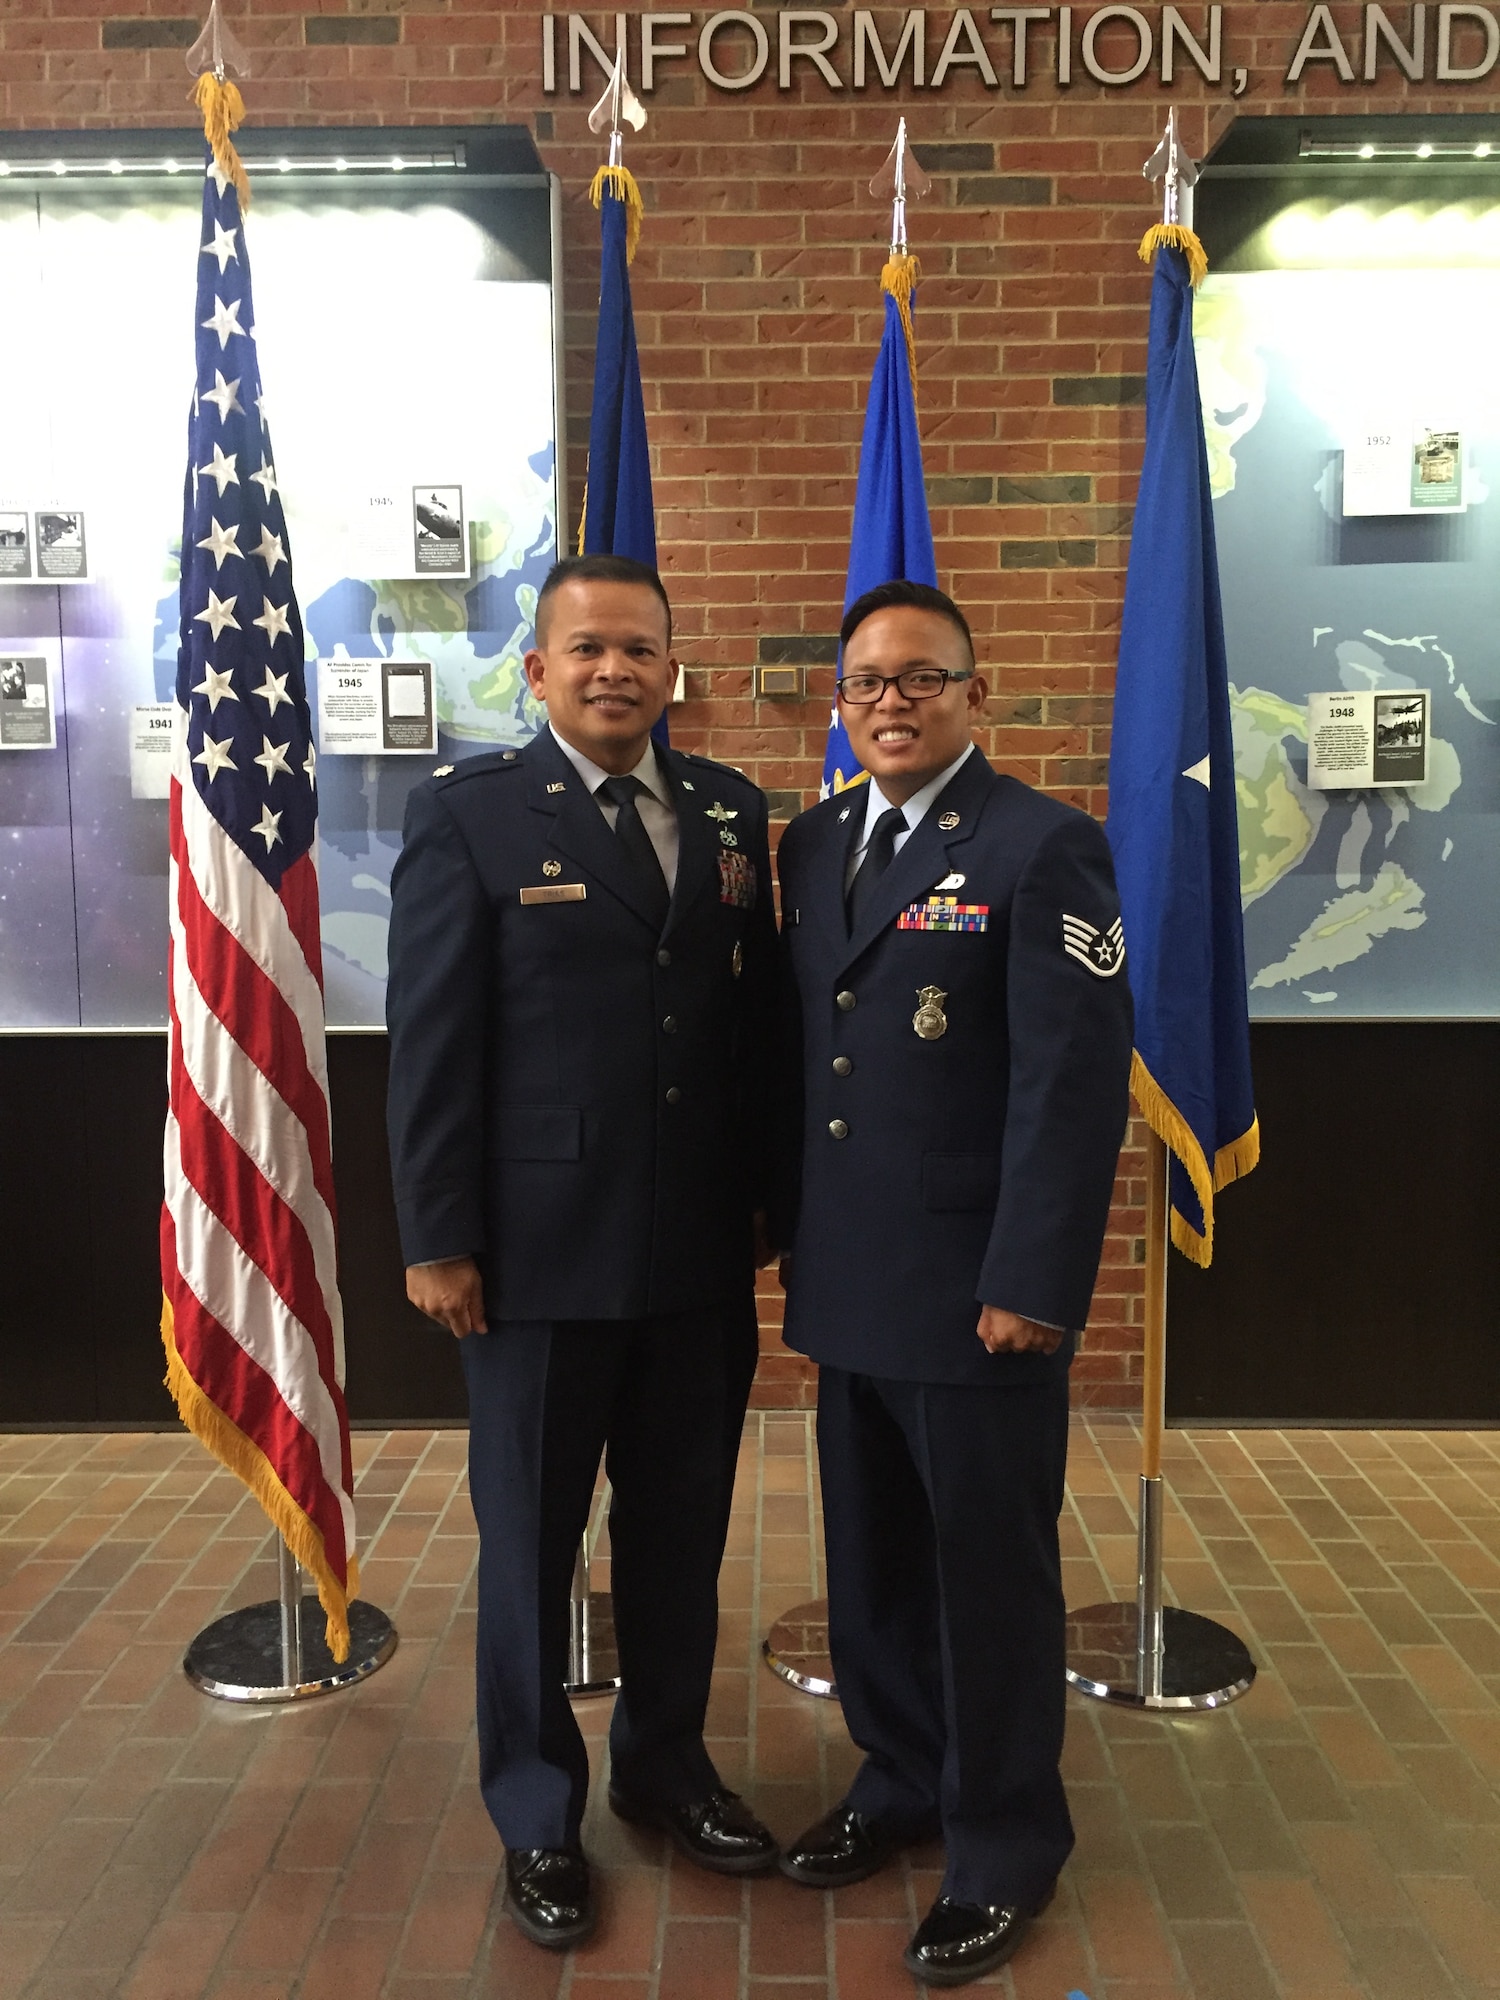 Lt. Col. Trias and his son, Staff Sgt. Christopher Trias.